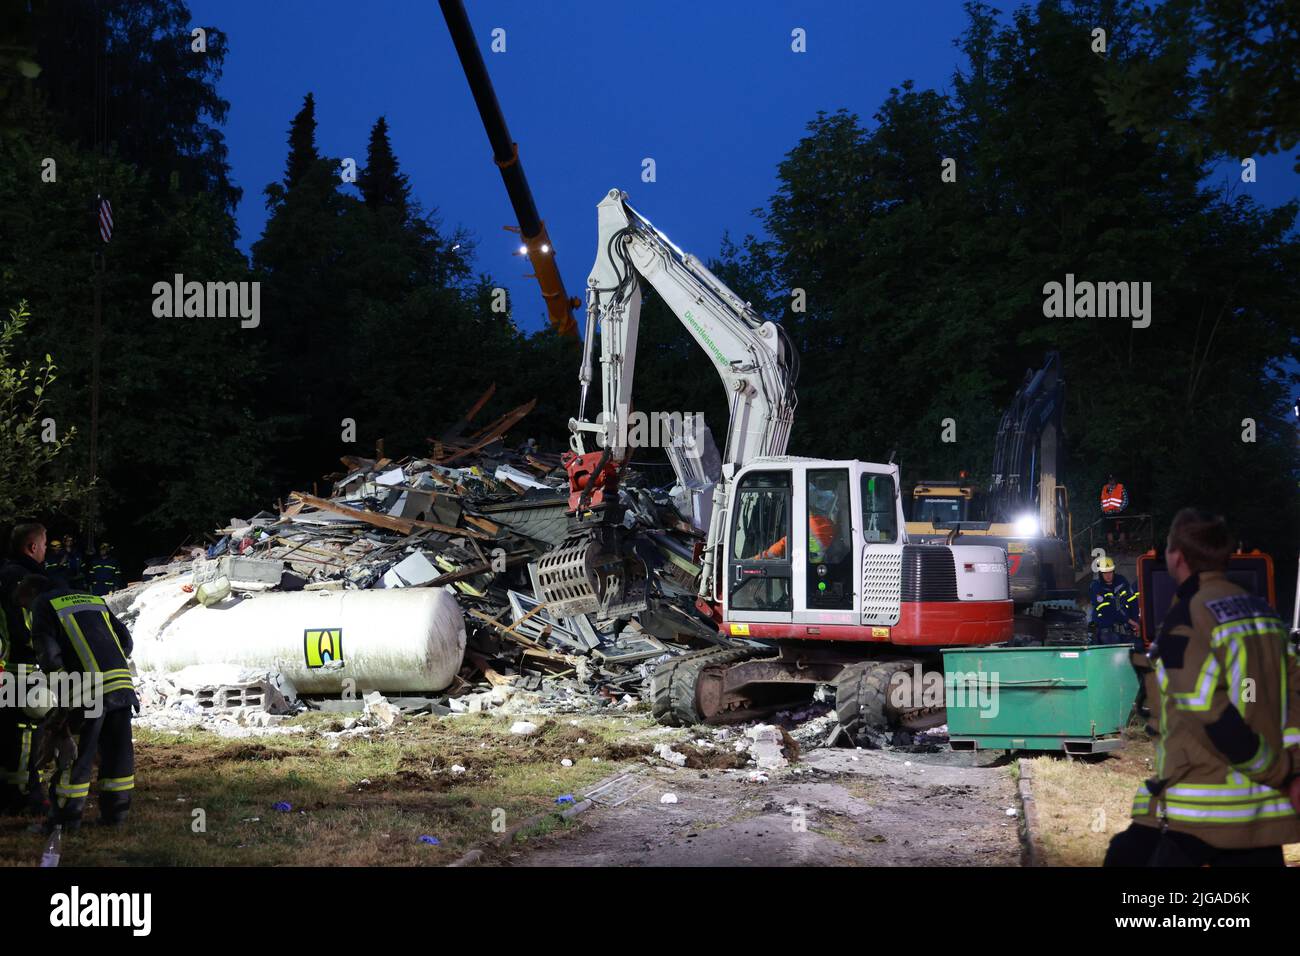 Hemer, Germany. 09th July, 2022. Rescue services are deployed with heavy equipment after an explosion in Hemer, Sauerland, caused the complete collapse of a multi-apartment building. By early Saturday morning, four people had been rescued from the rubble with injuries. Credit: Bjoern Braun/dpa/Alamy Live News Stock Photo